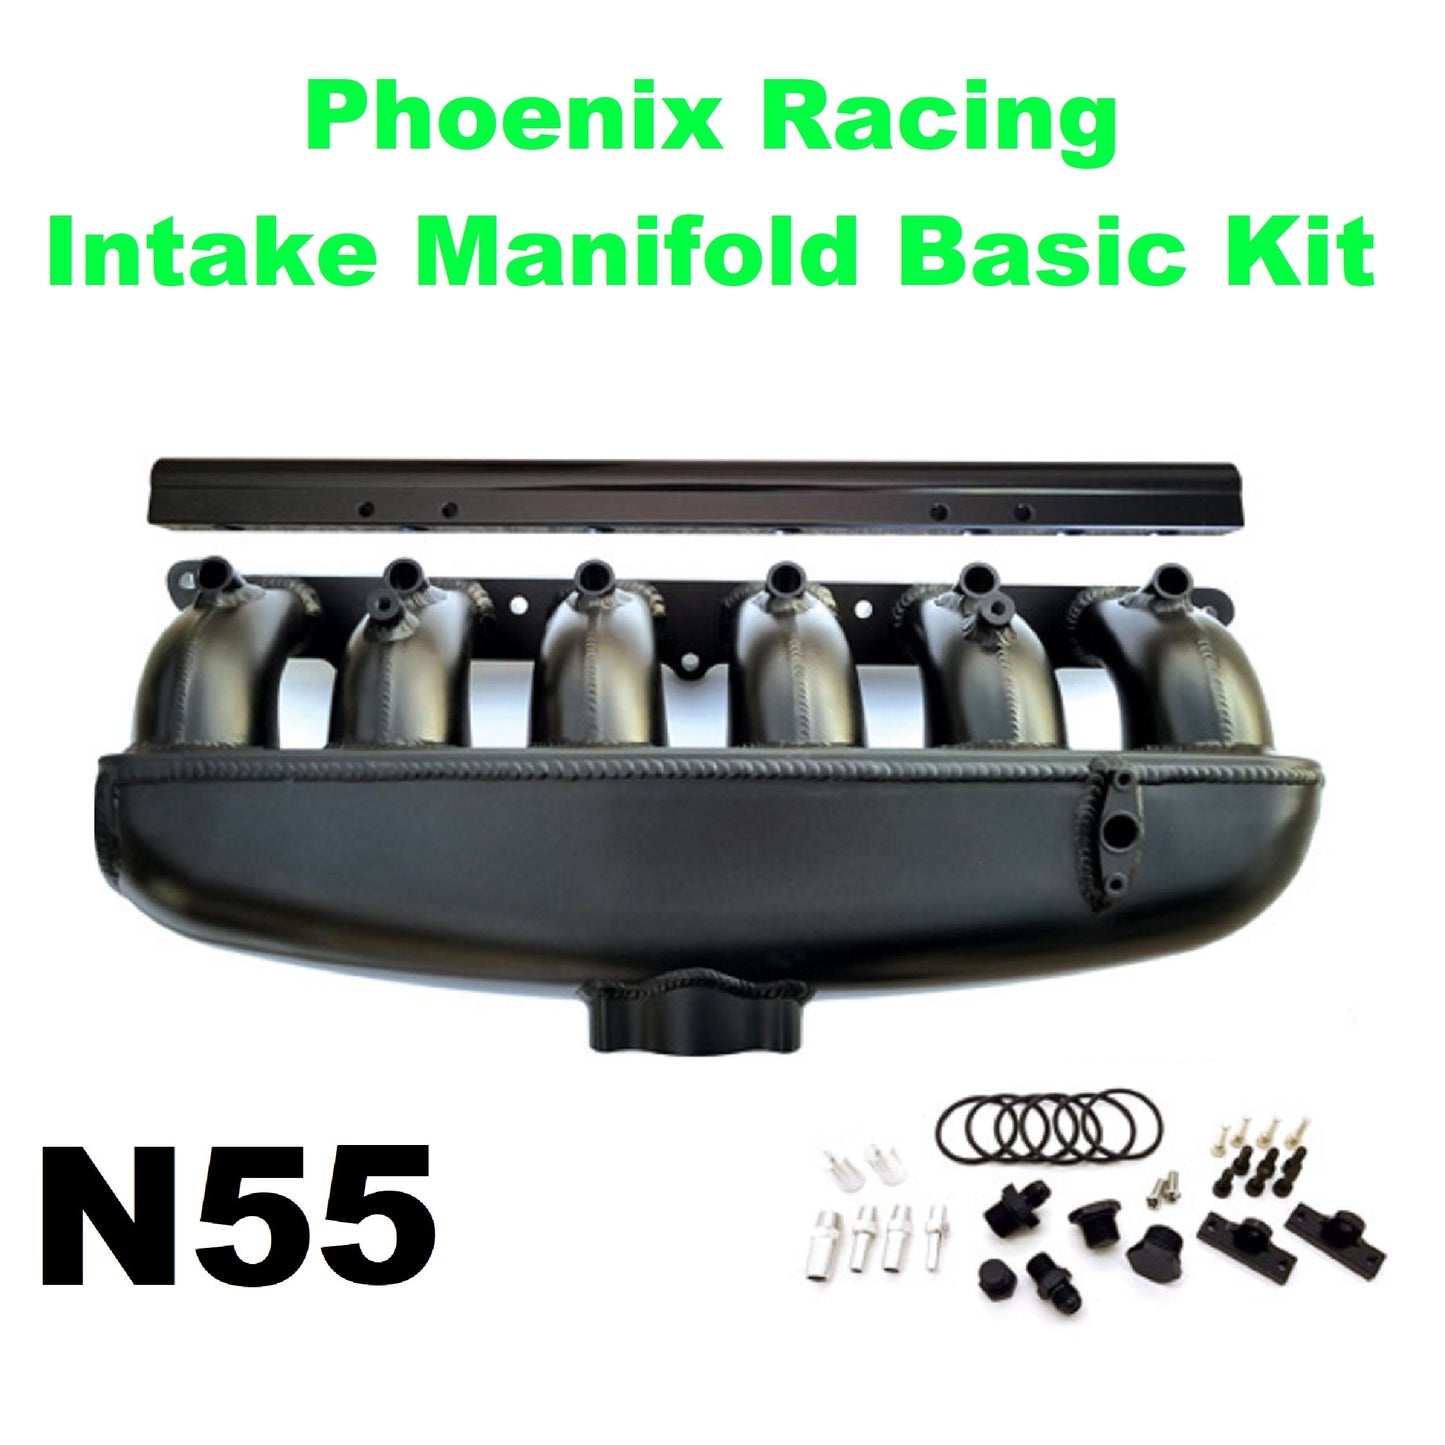 BMW E-Chassis Port Injection Kits for the N55 Motors